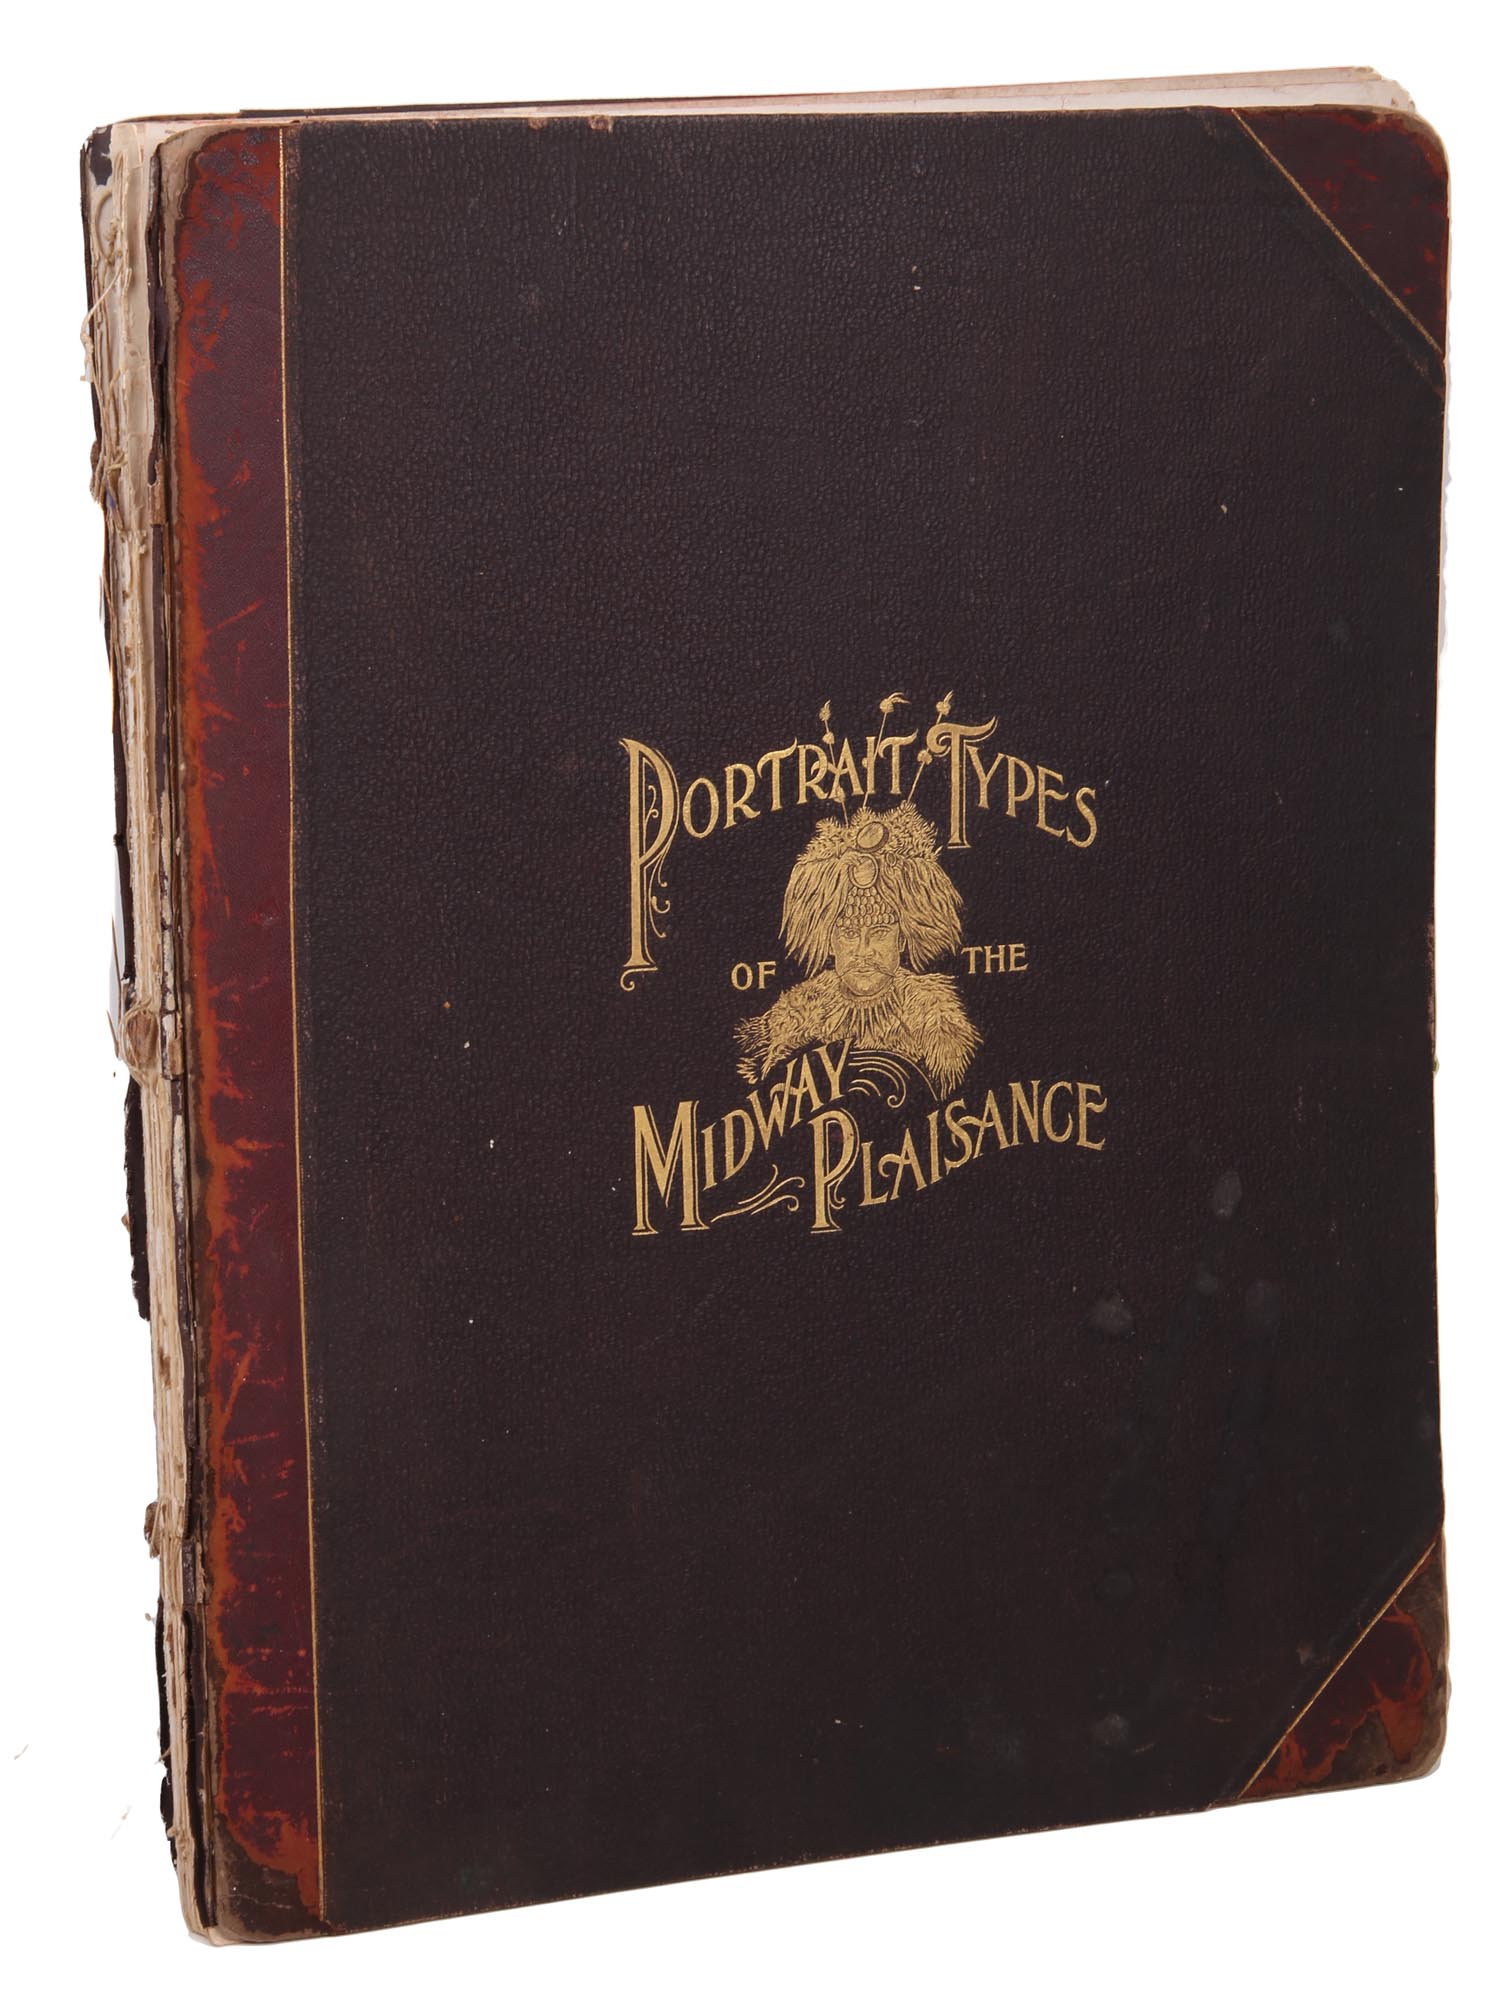 PORTRAITS TYPES OF THE MIDWAY PLAISANCE BOOK 1894 PIC-0